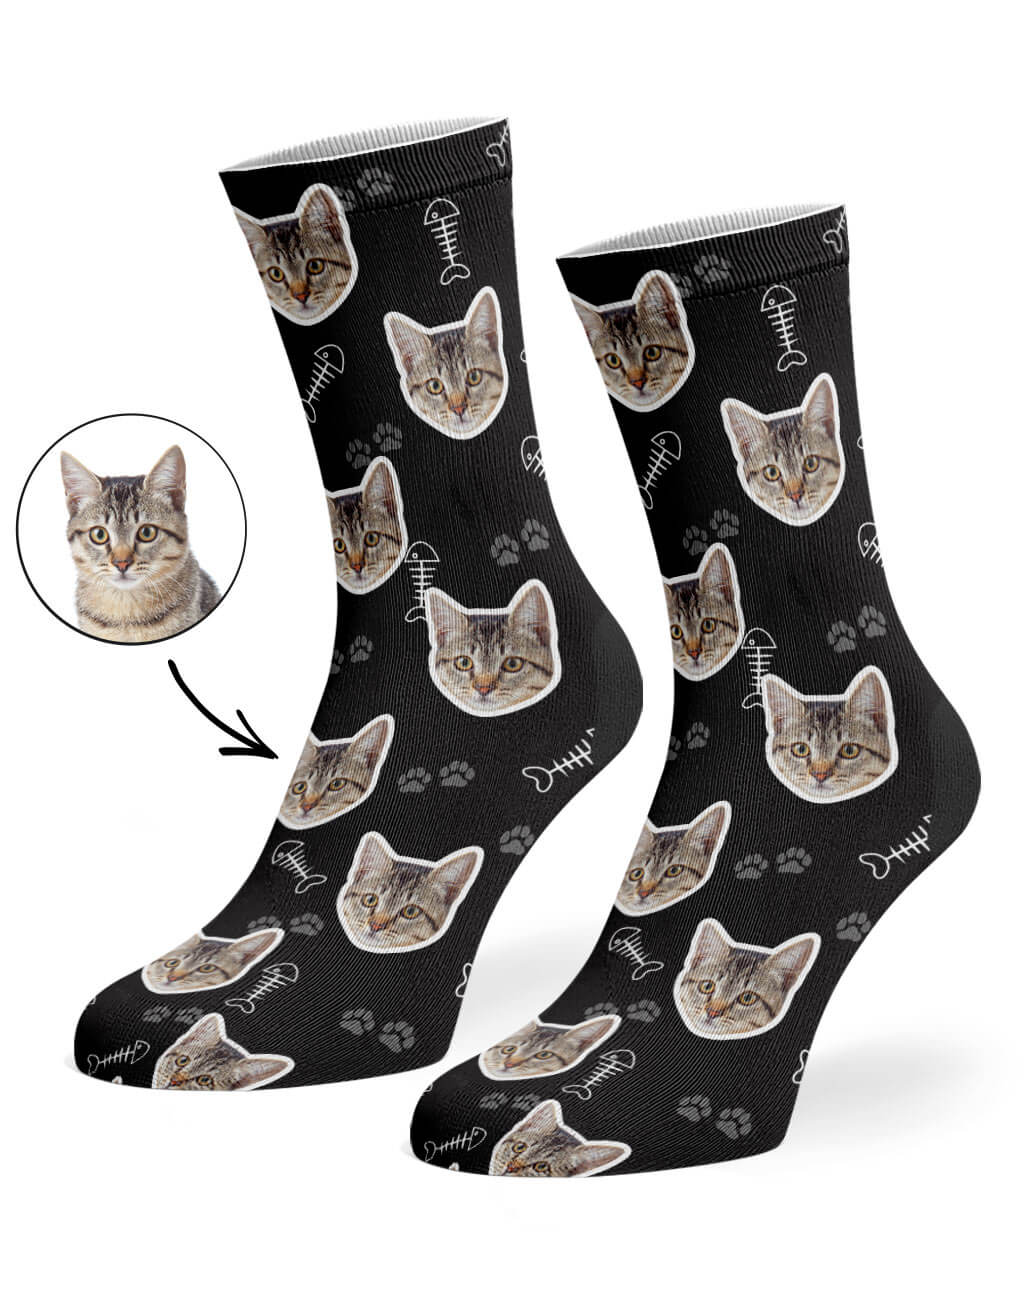 cat socks with your photo on